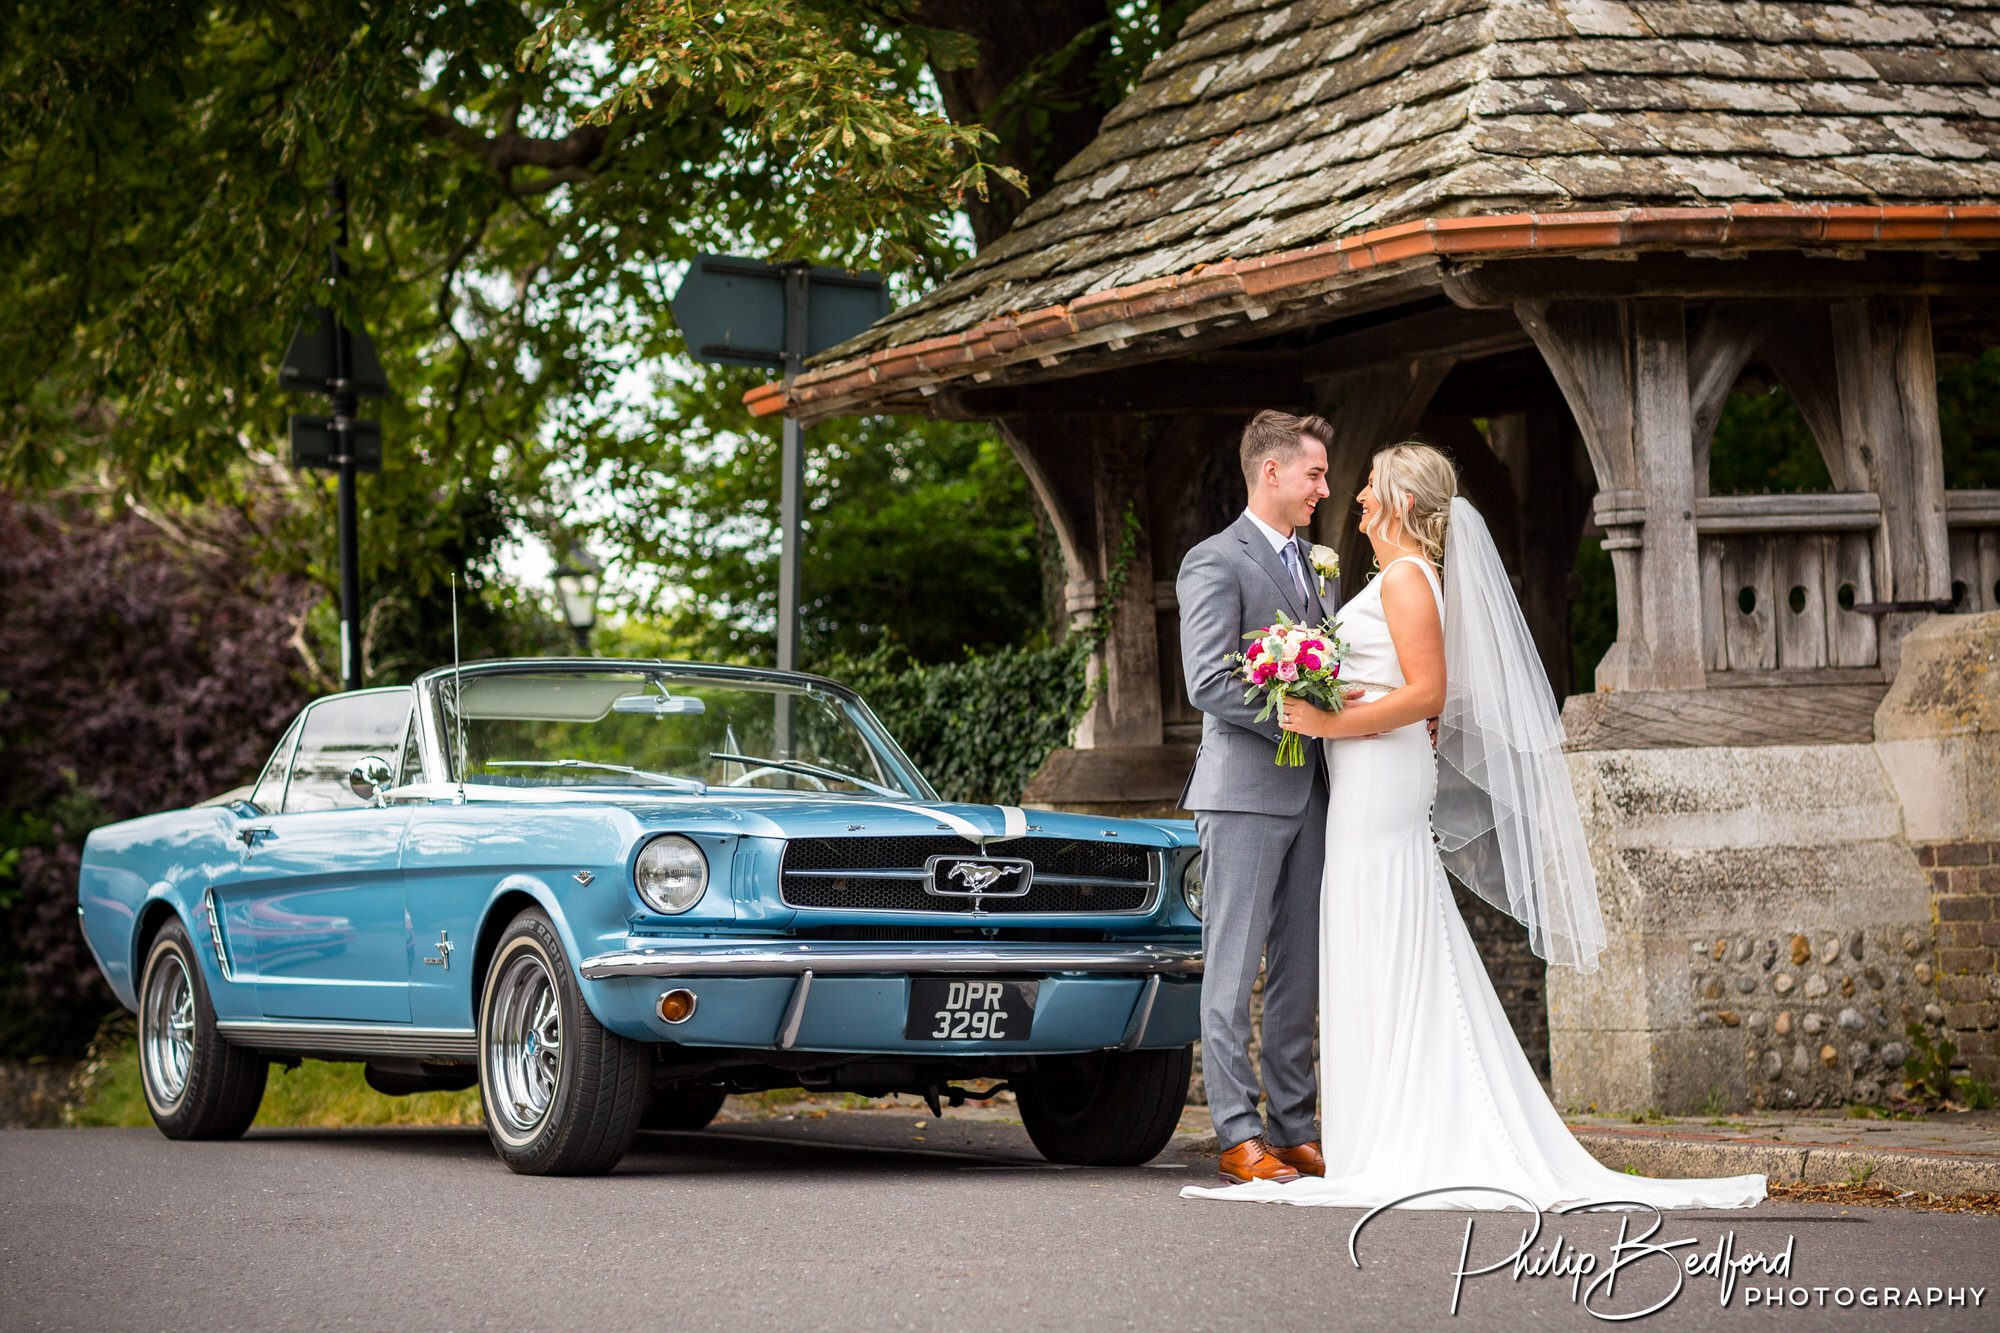 Phillipa & Sean, St Andrews and St Cuthman's Church Wedding, Steyning, West Sussex